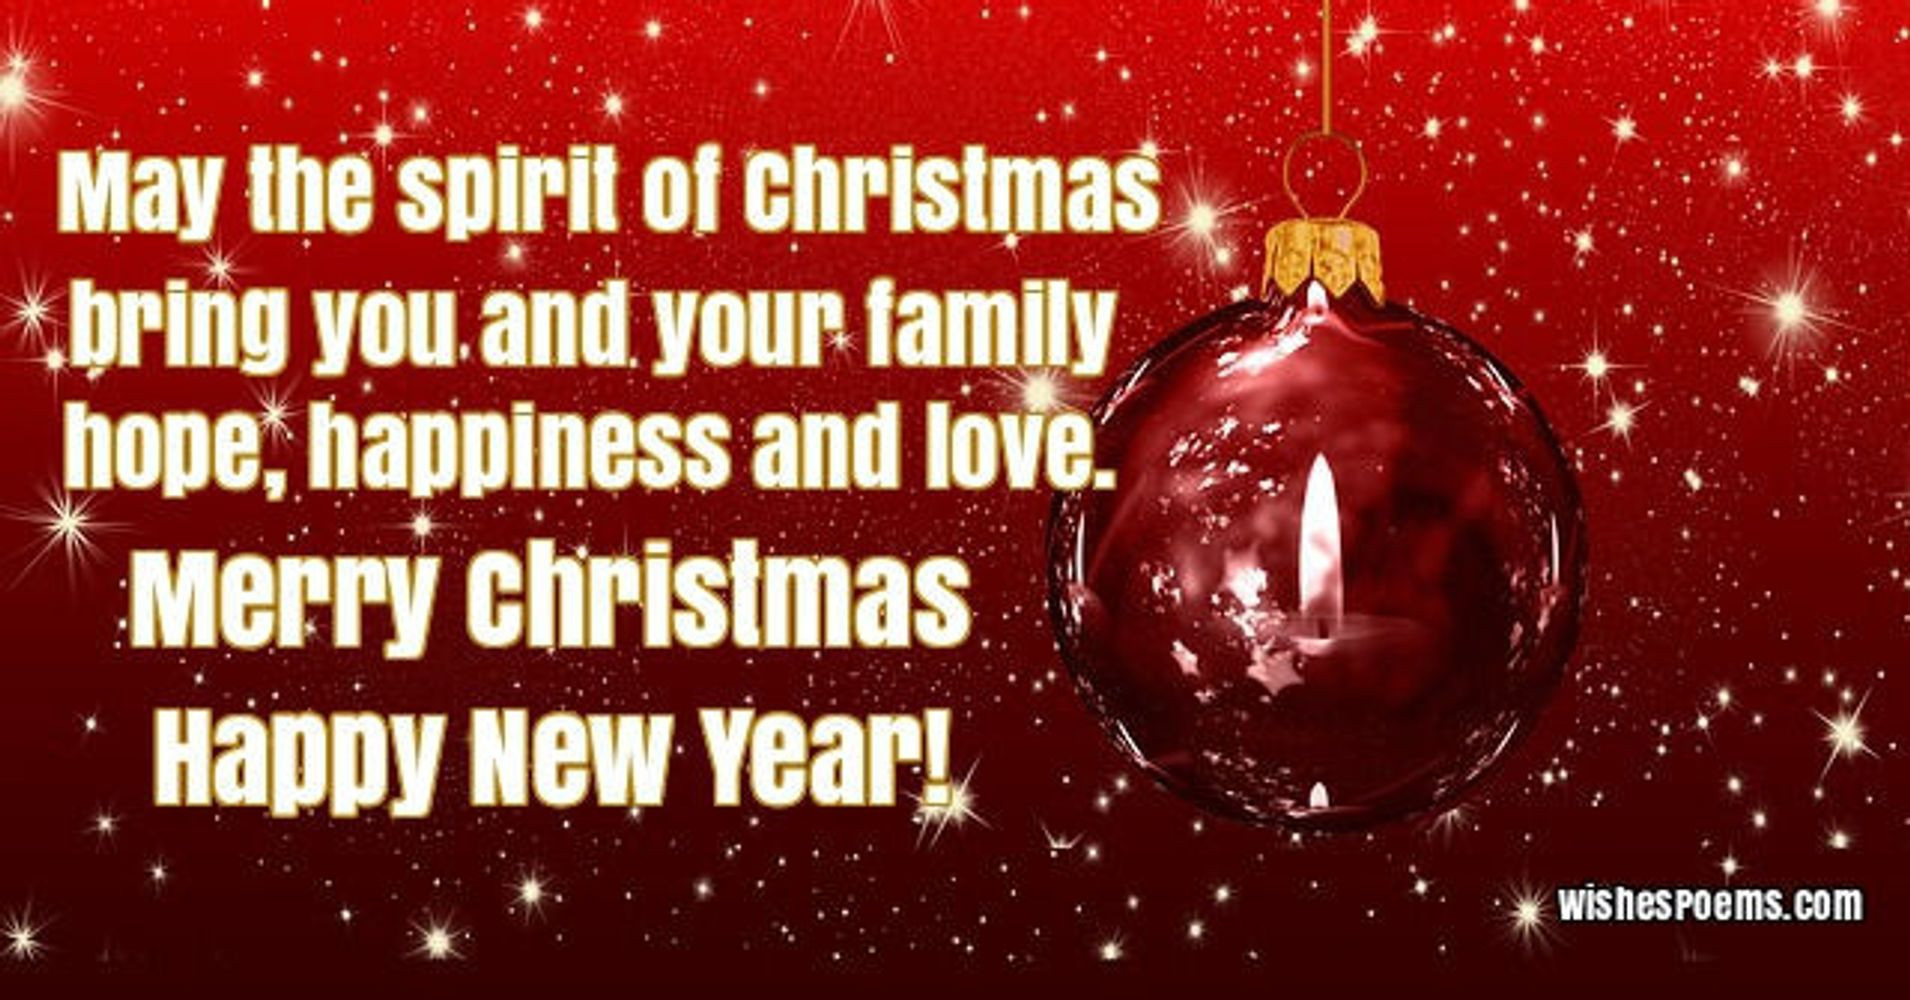 Merry Christmas Quotes For Cards
 35 Christmas Card Messages What to Write in a Christmas